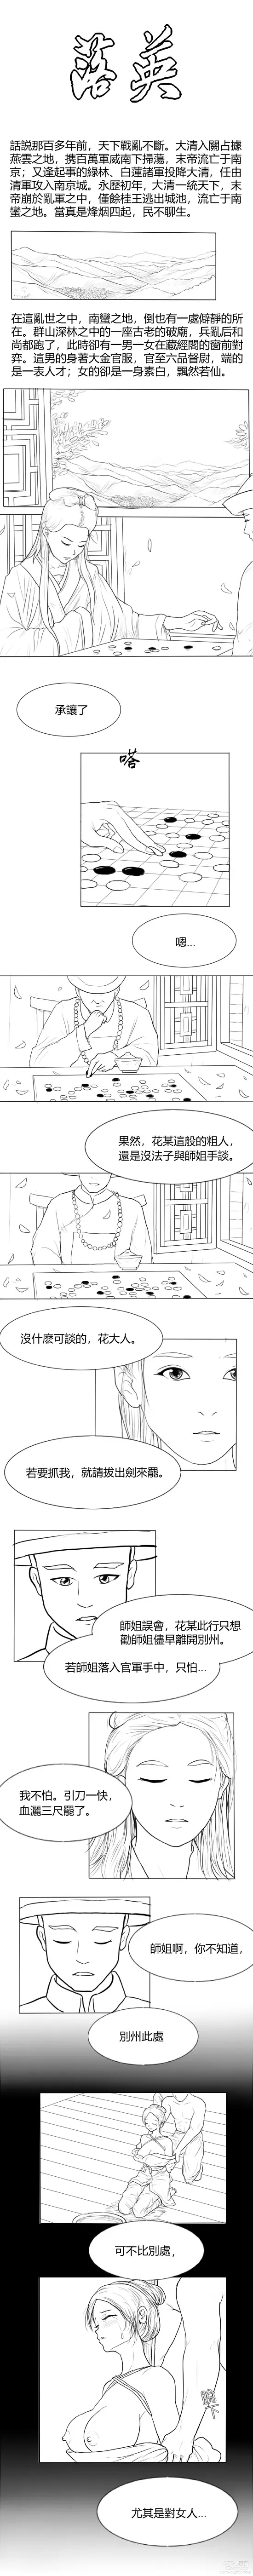 Page 1 of doujinshi 落英  第一话